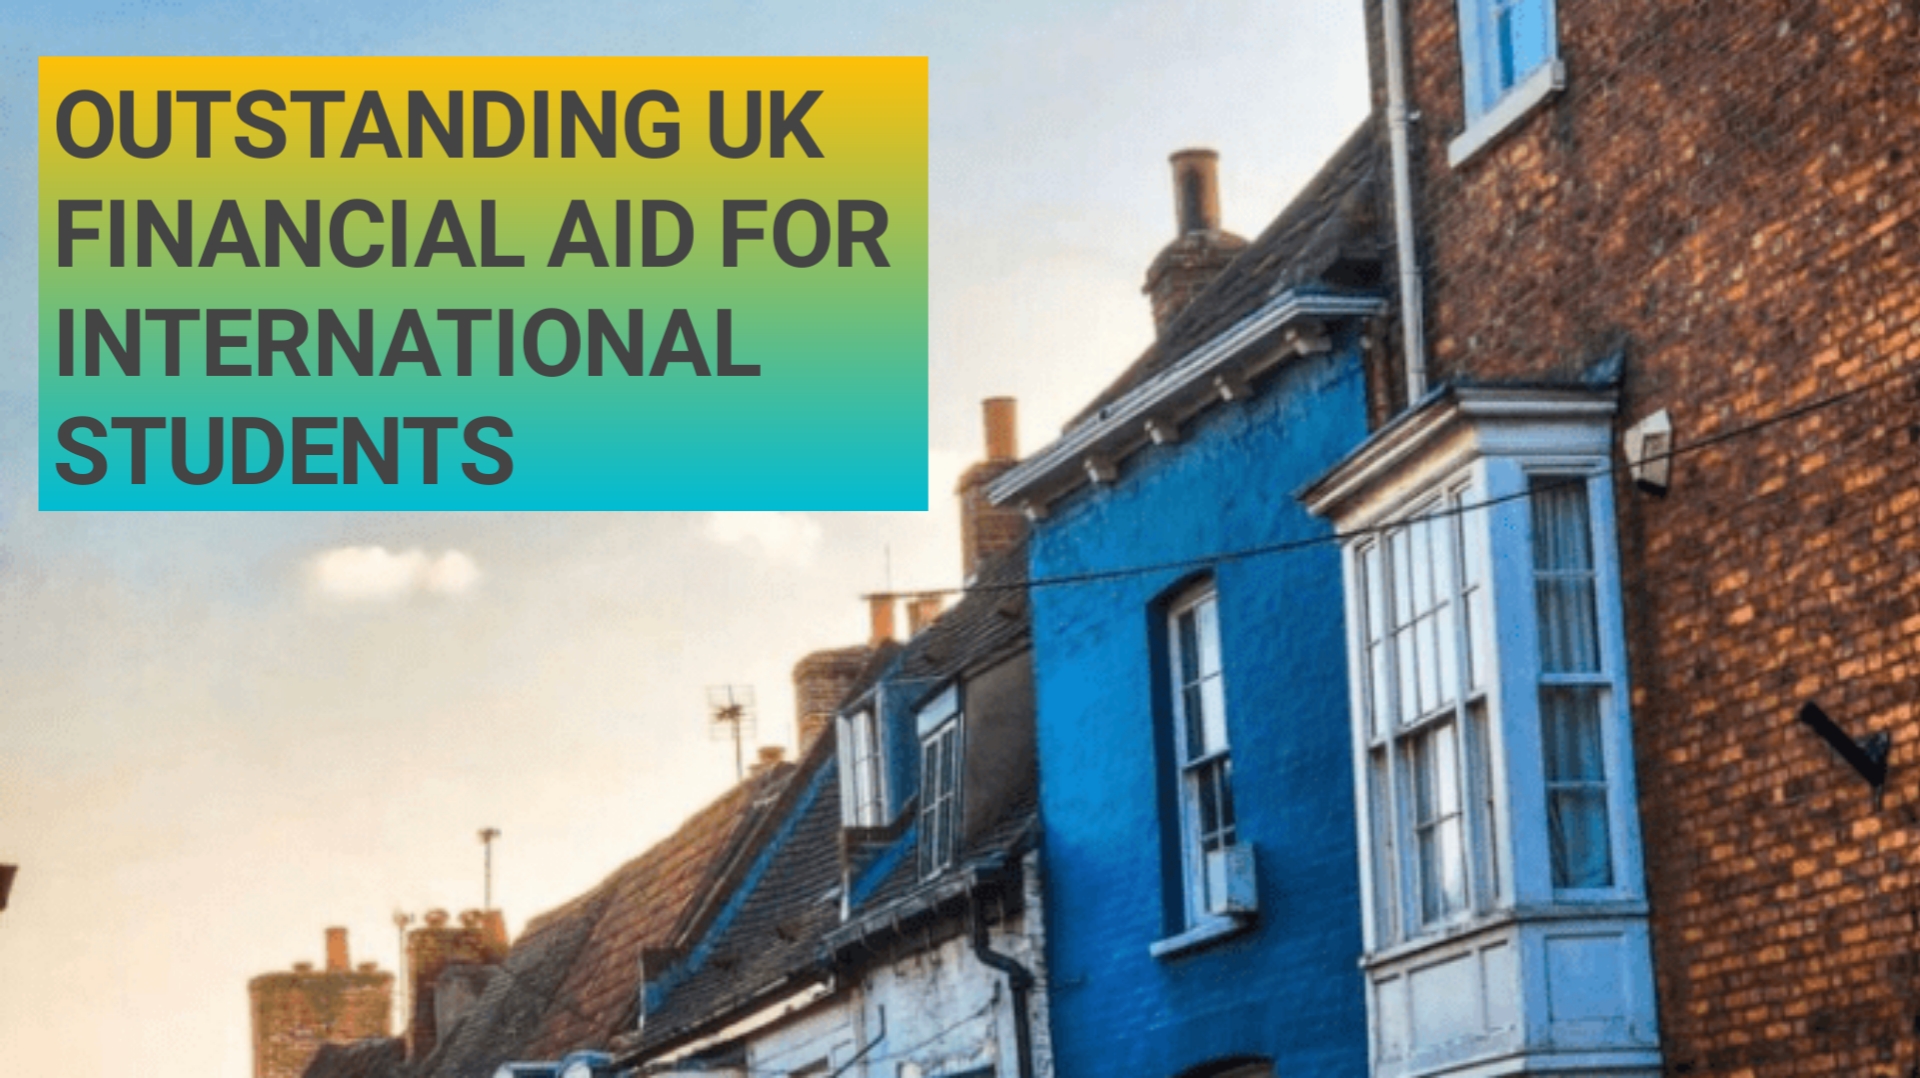 UK Financial Aid for International Students